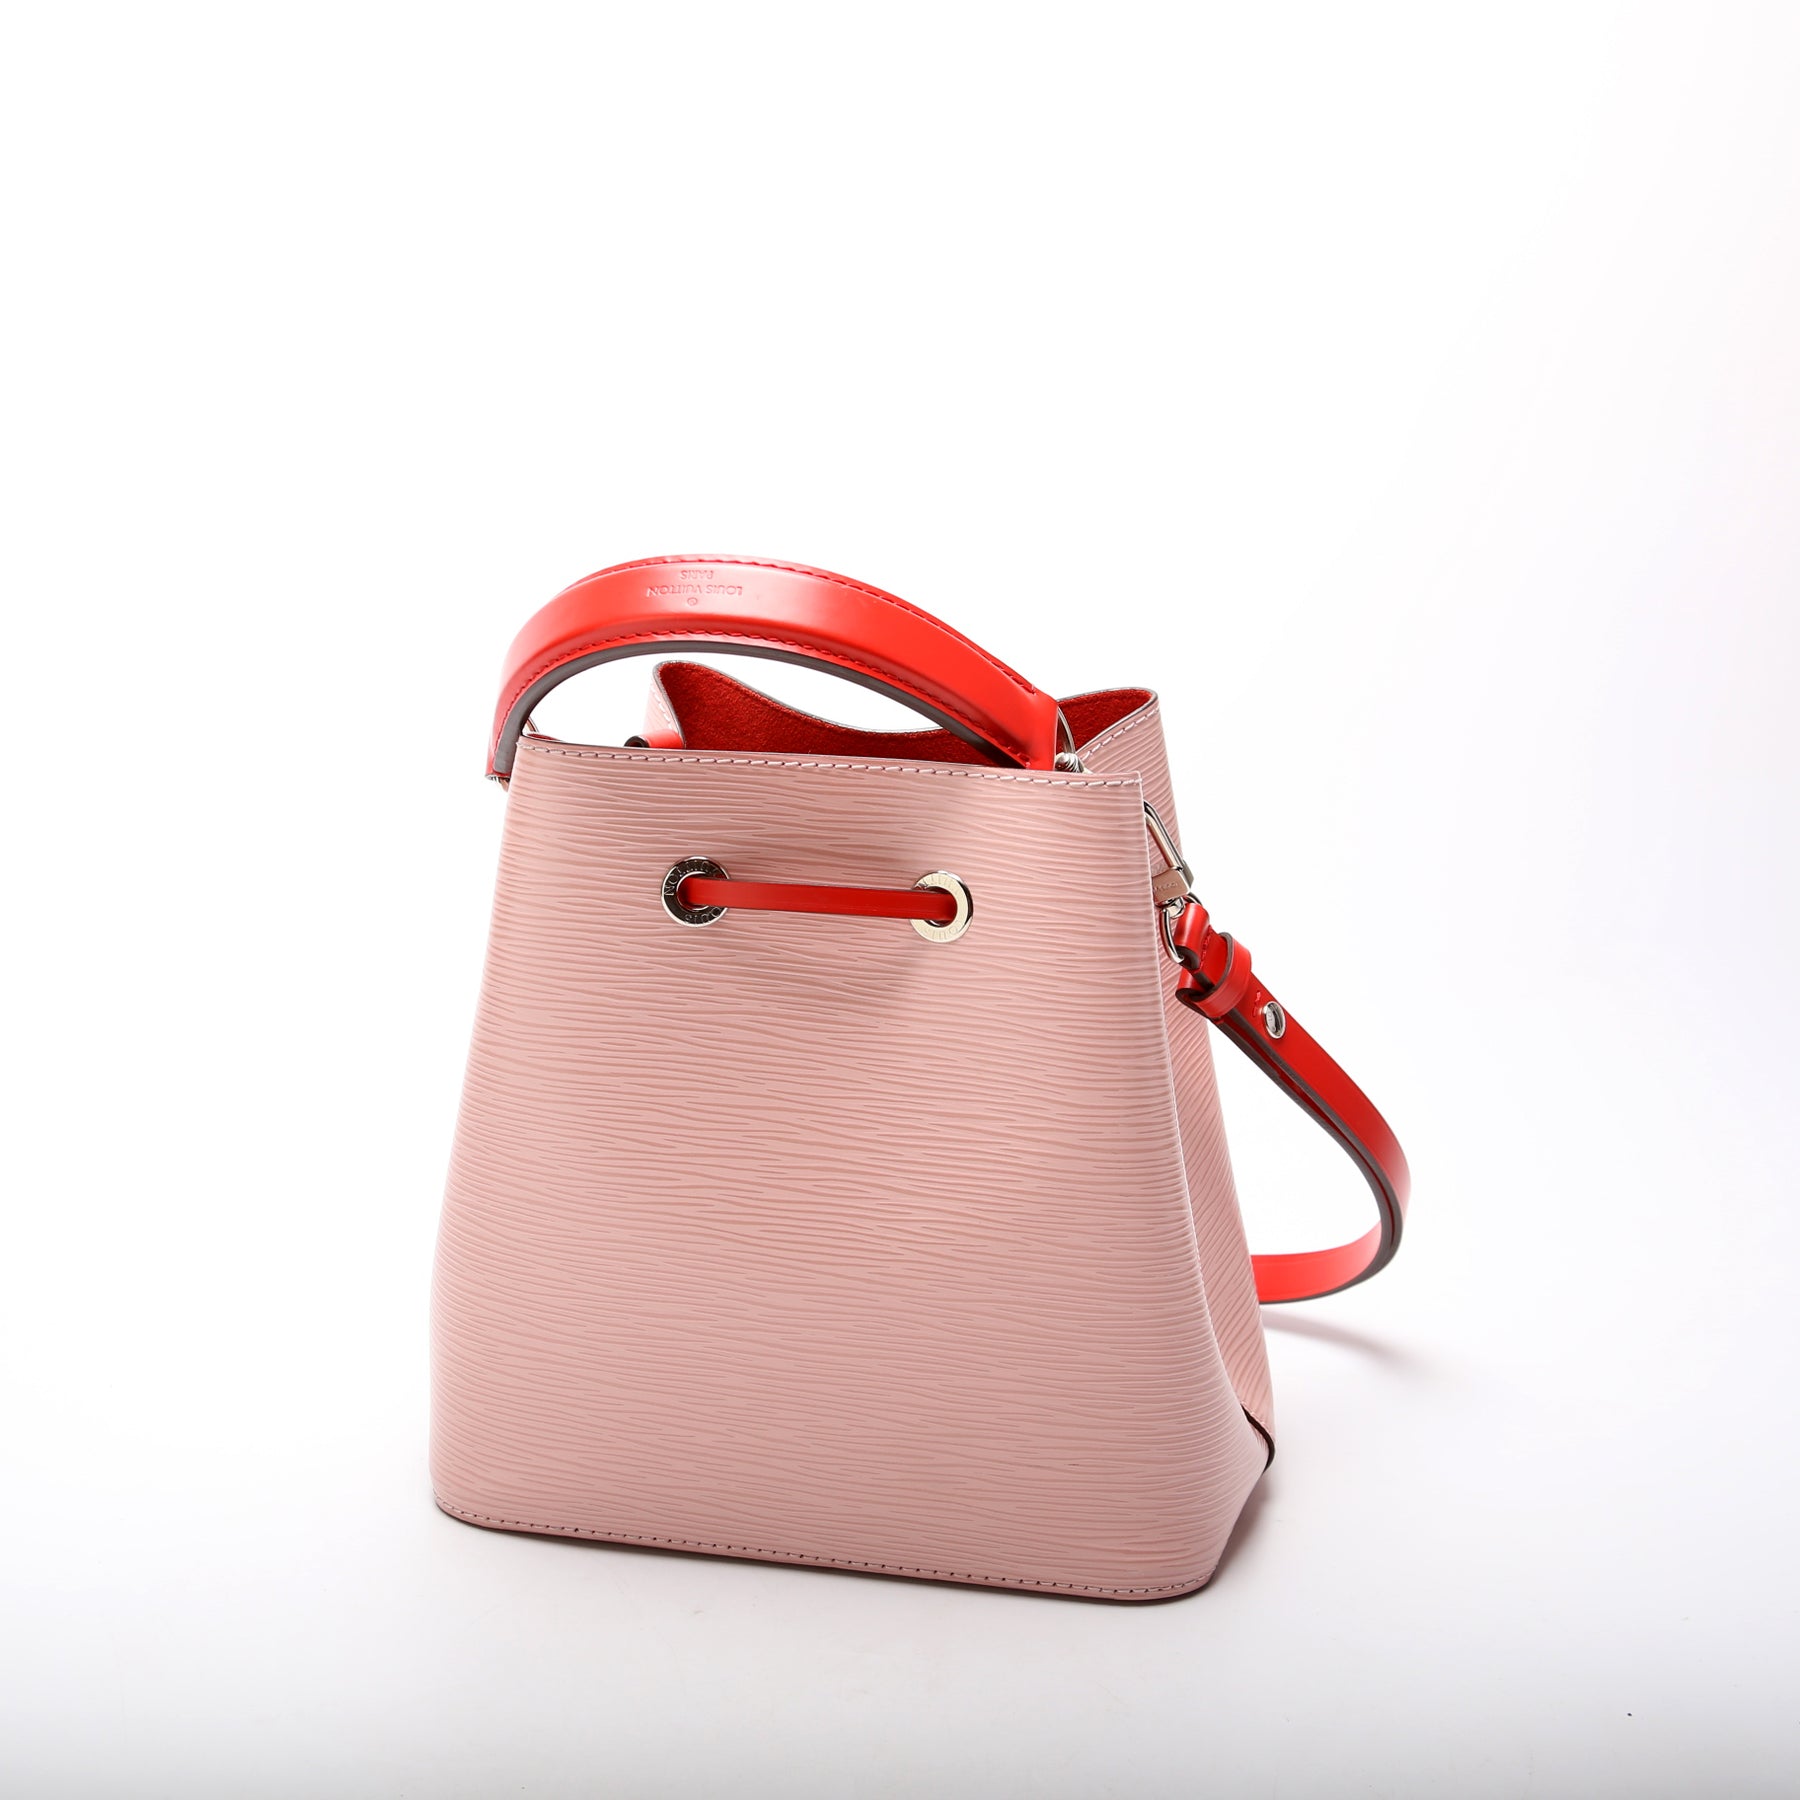 The Louis Vuitton Neonoe Bag Now Comes in 6 Colors of Epi Leather